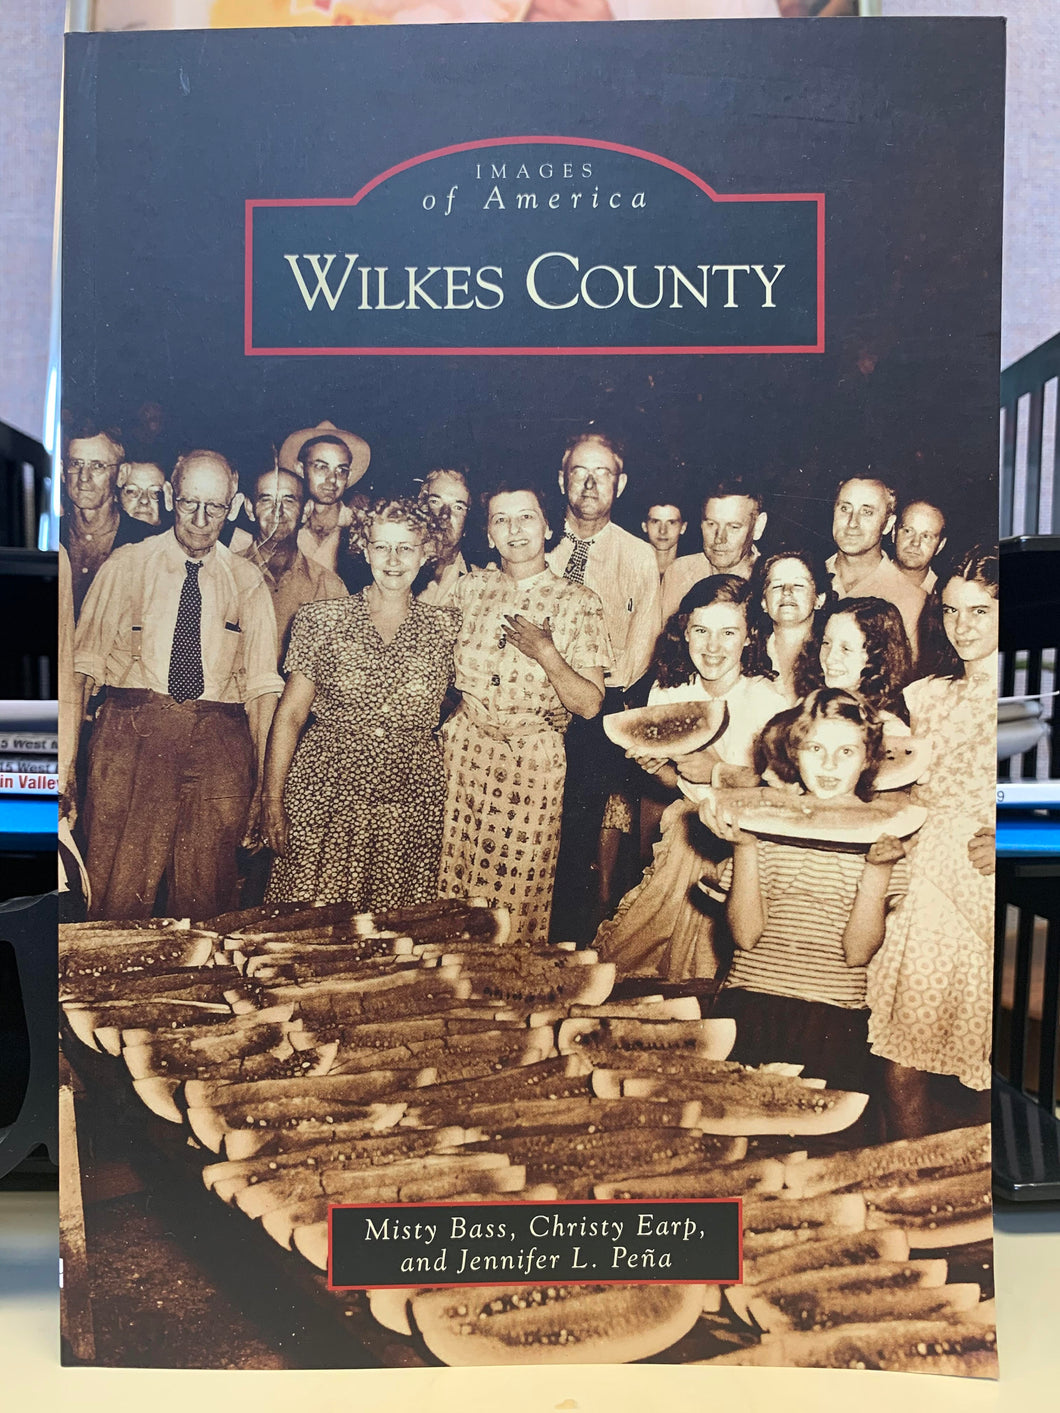 Images of America: Wilkes County by Misty Bass, Christy Earp, and Jennifer L. Peña